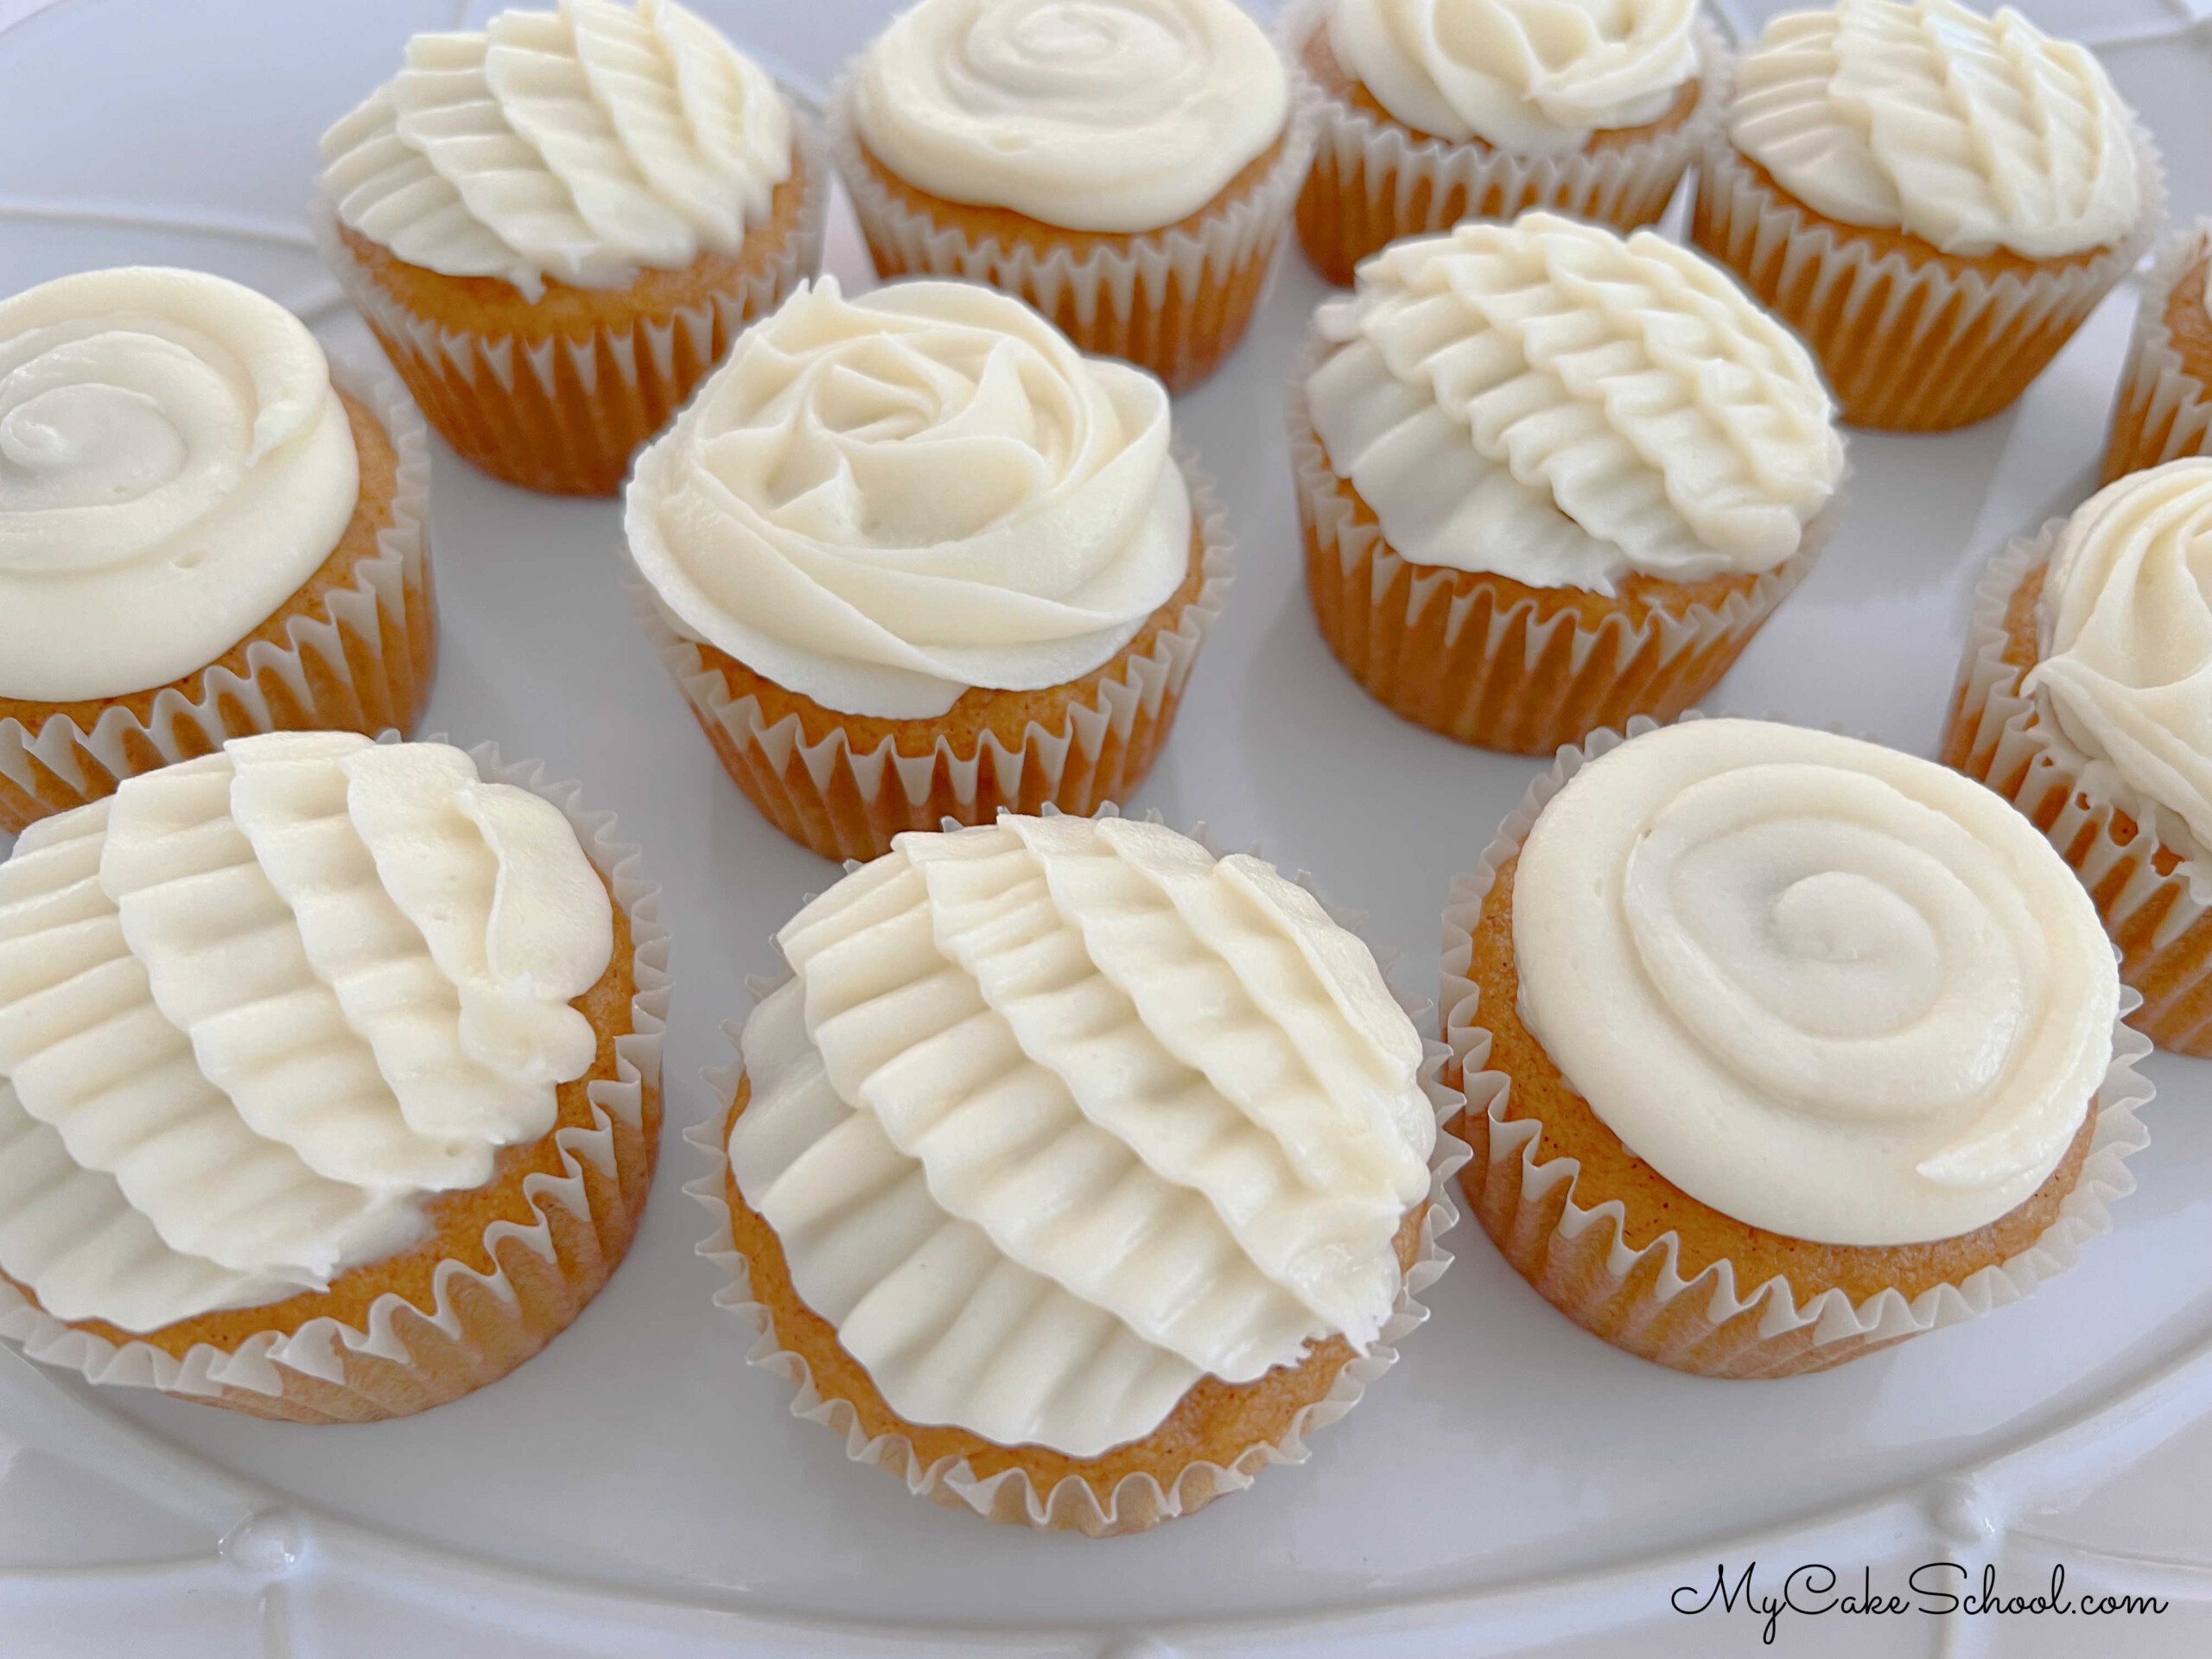 Platter of Pumpkin Cupcakes with Decorative Cream Cheese Piping.